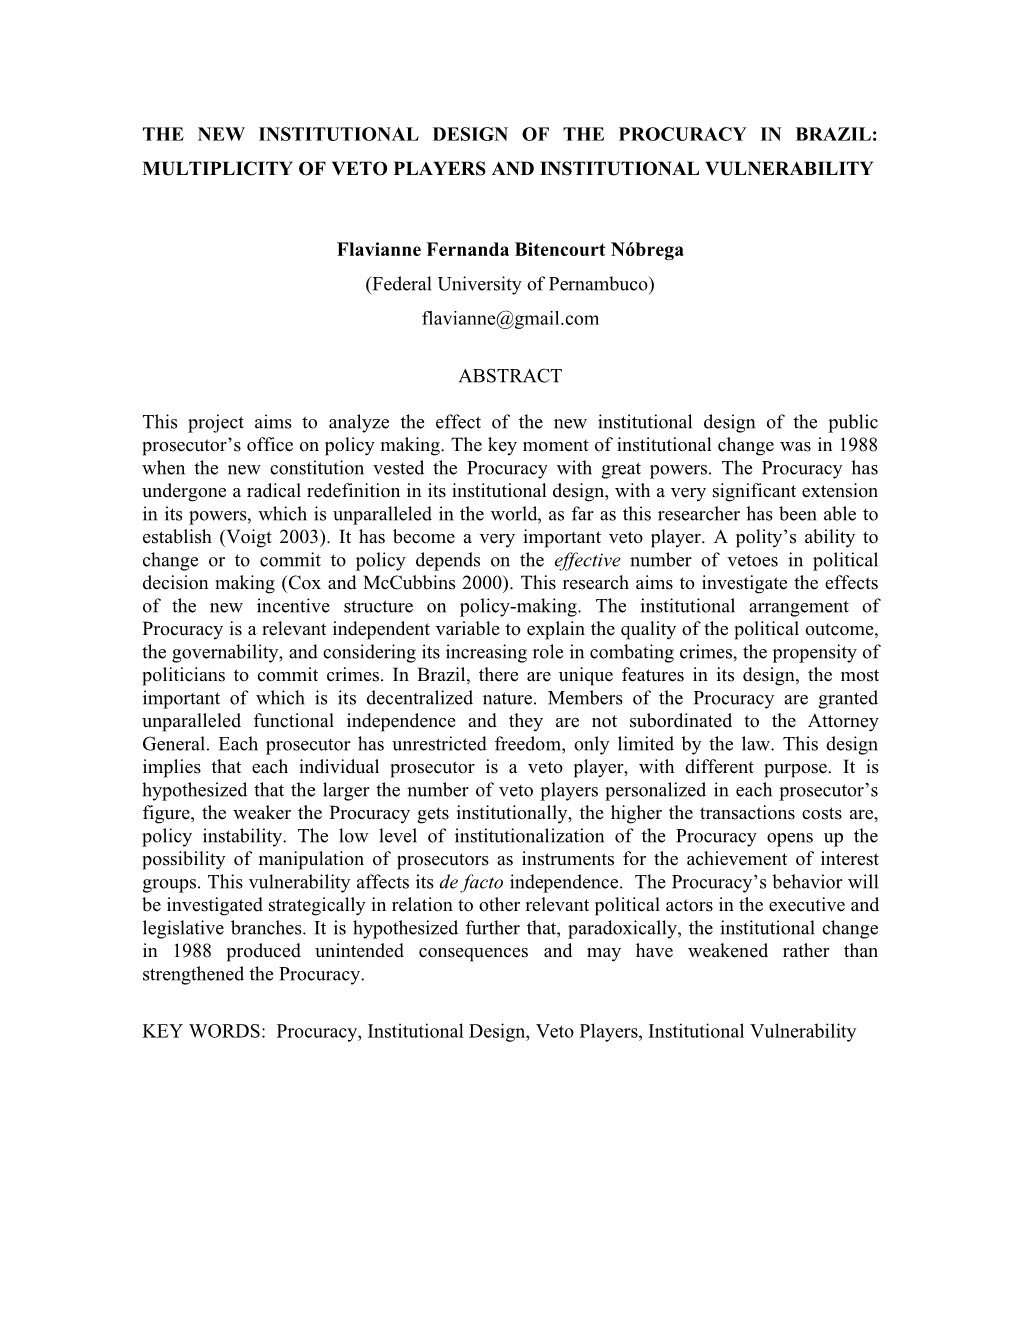 The New Institutional Design of the Procuracy in Brazil: Multiplicity of Veto Players and Institutional Vulnerability